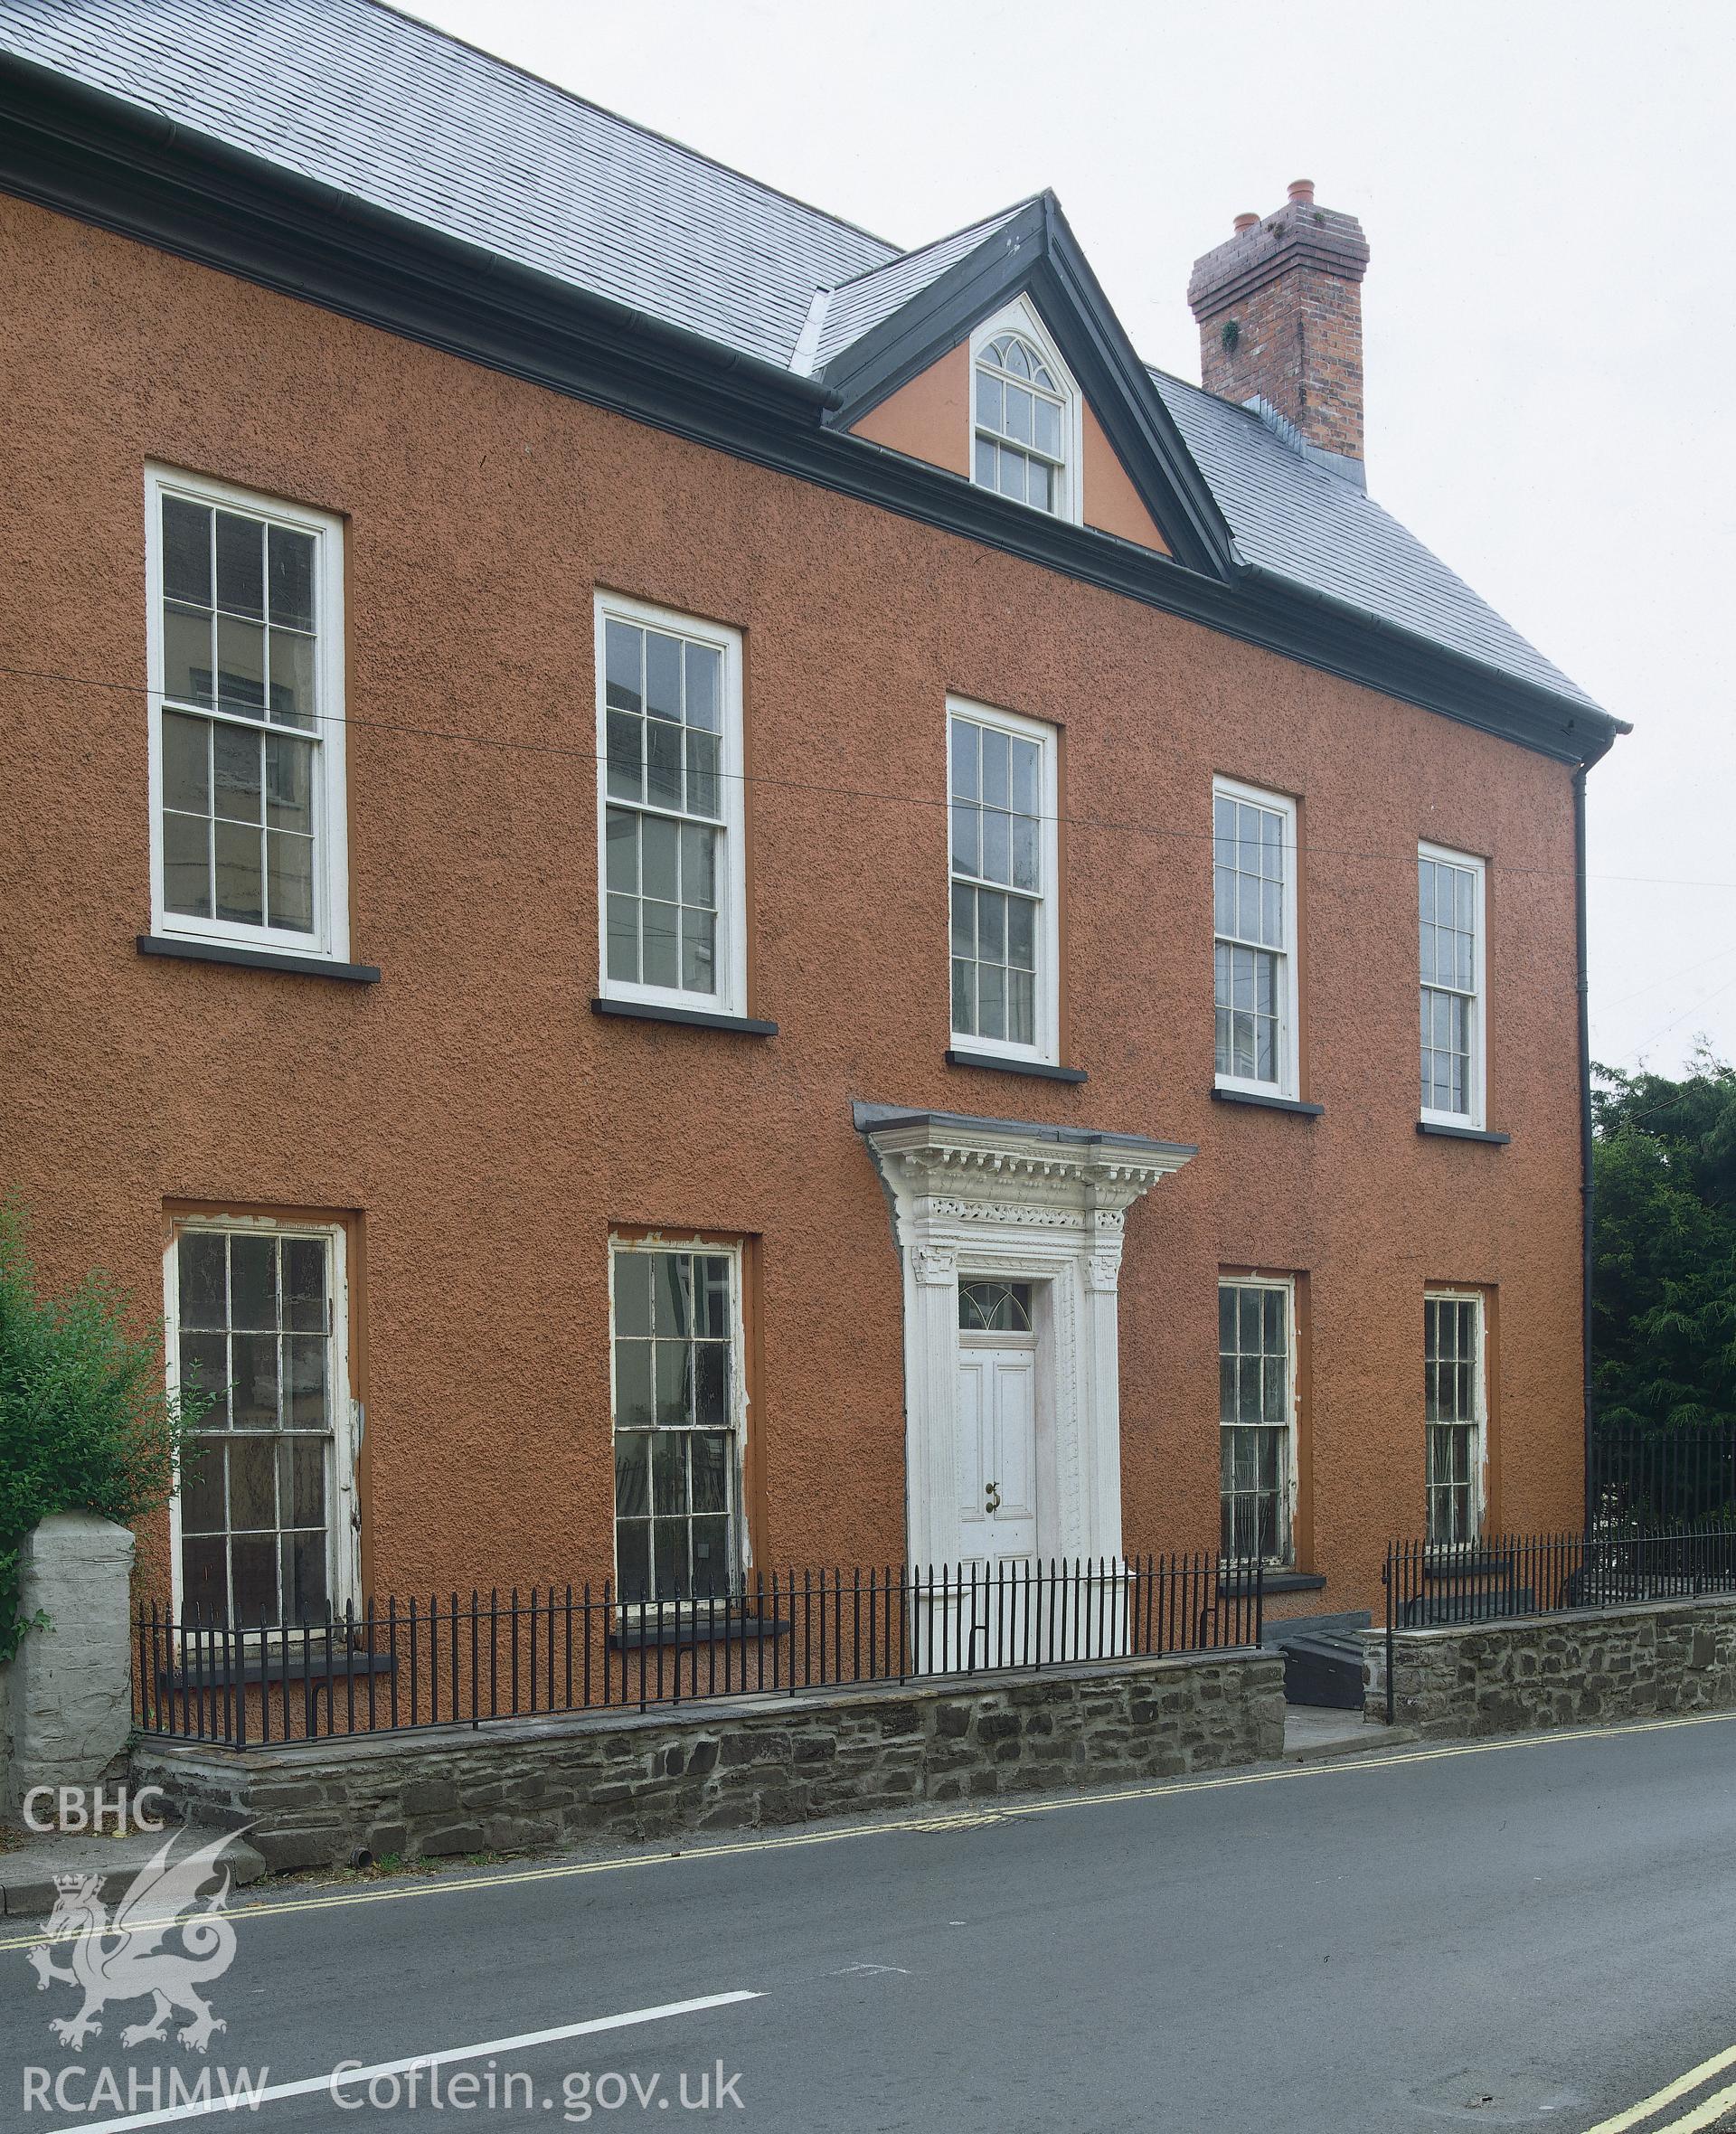 RCAHMW colour transparency showing exterior view of Great House, Laugharne.